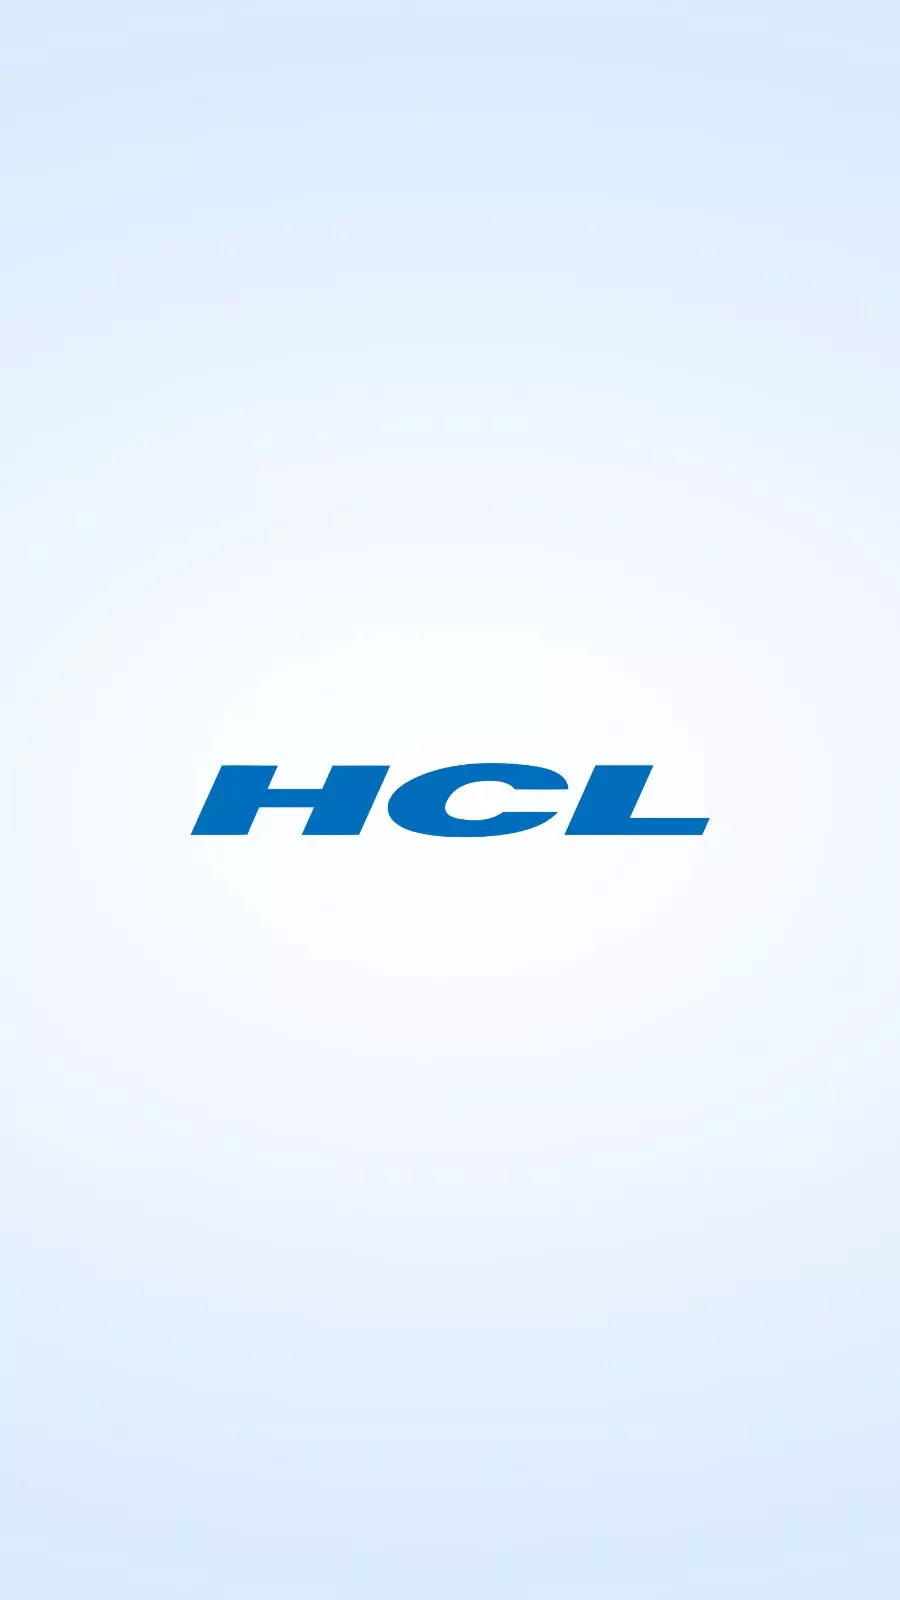 HCL Tech Leads IT Sector Share Crash After Managment Call Investors  Worried Now  IT Sector Share Crash HCL Tech क अगवई म आईट सटकस  म आई बड गरवट बजर क बढ